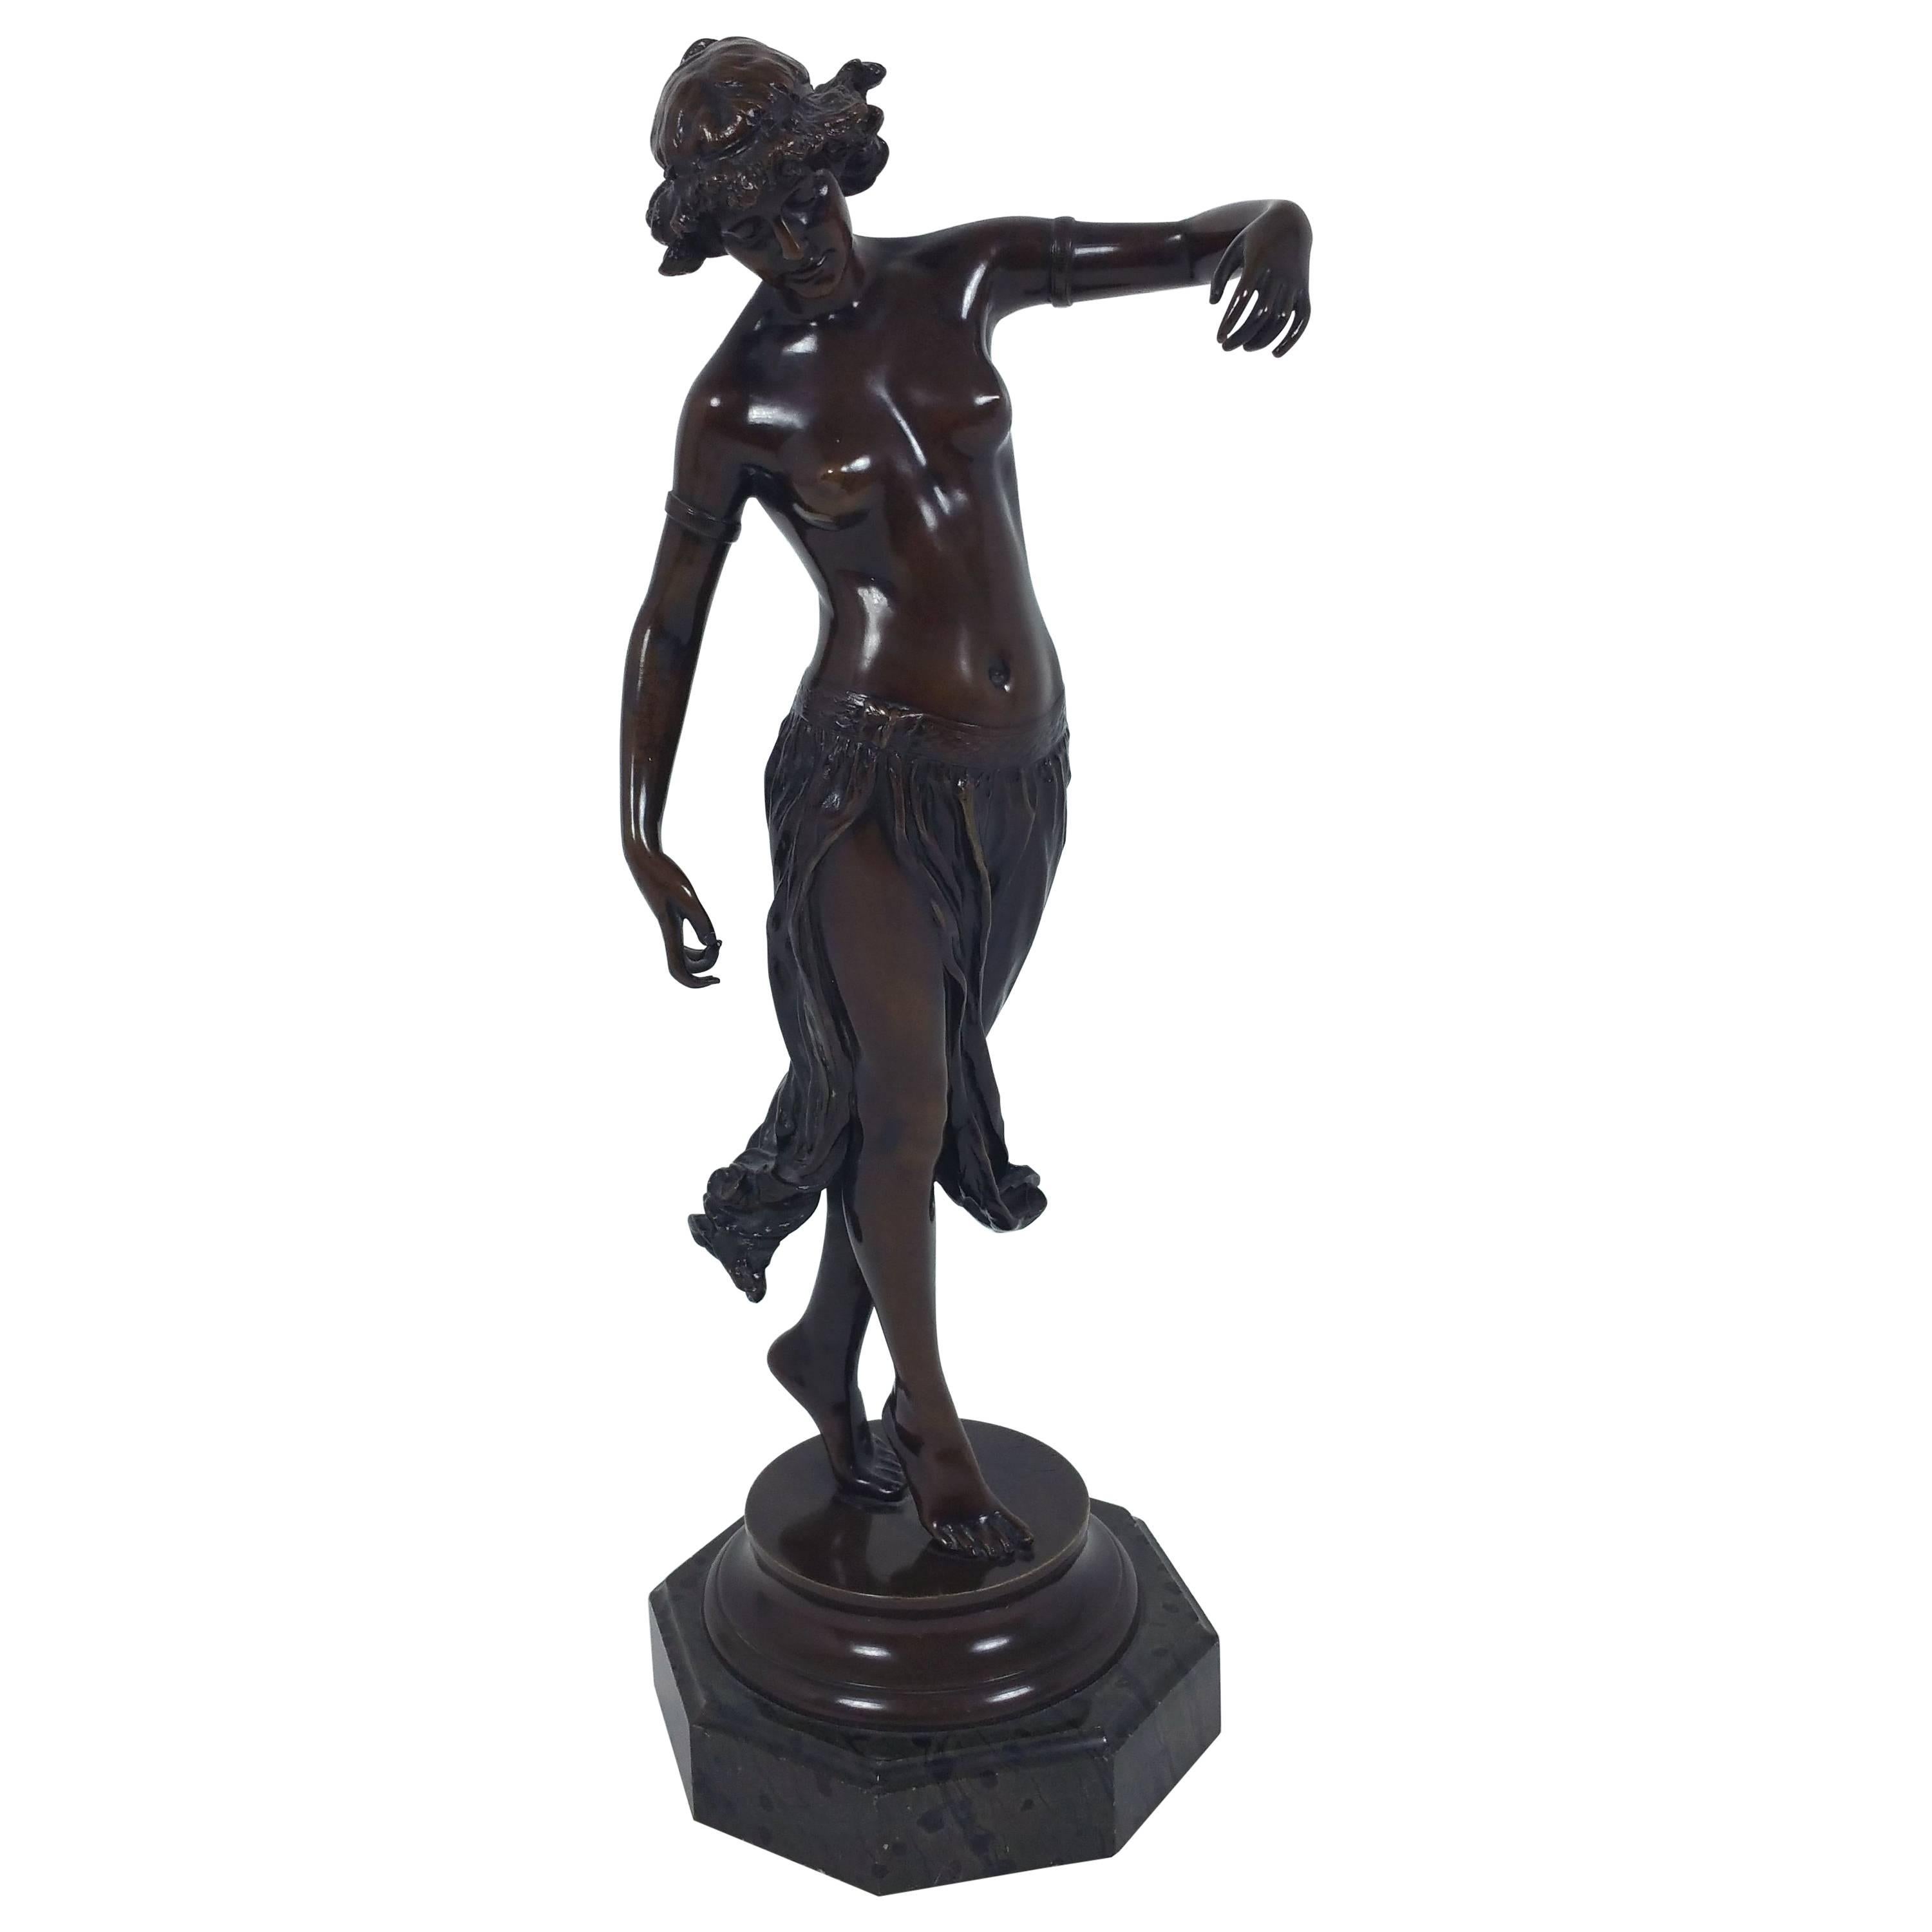 Superb Bronze Female Figure by Edward Onslow Ford